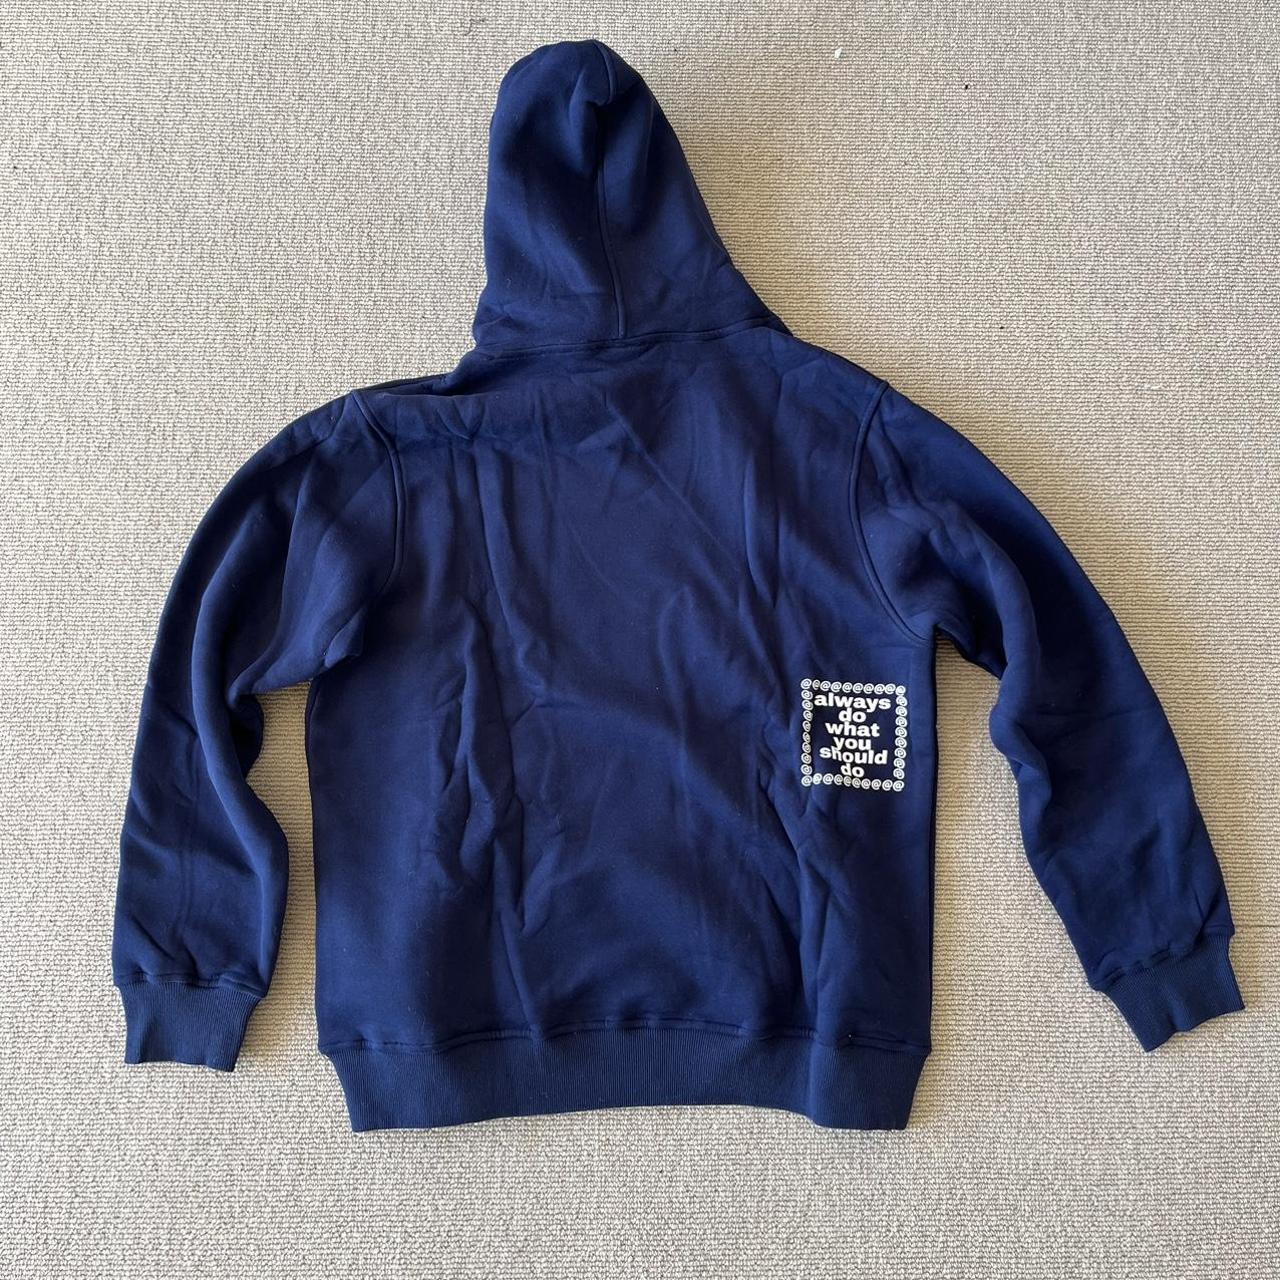 ADWYSD hoodie - navy Size medium New, with tags - Depop